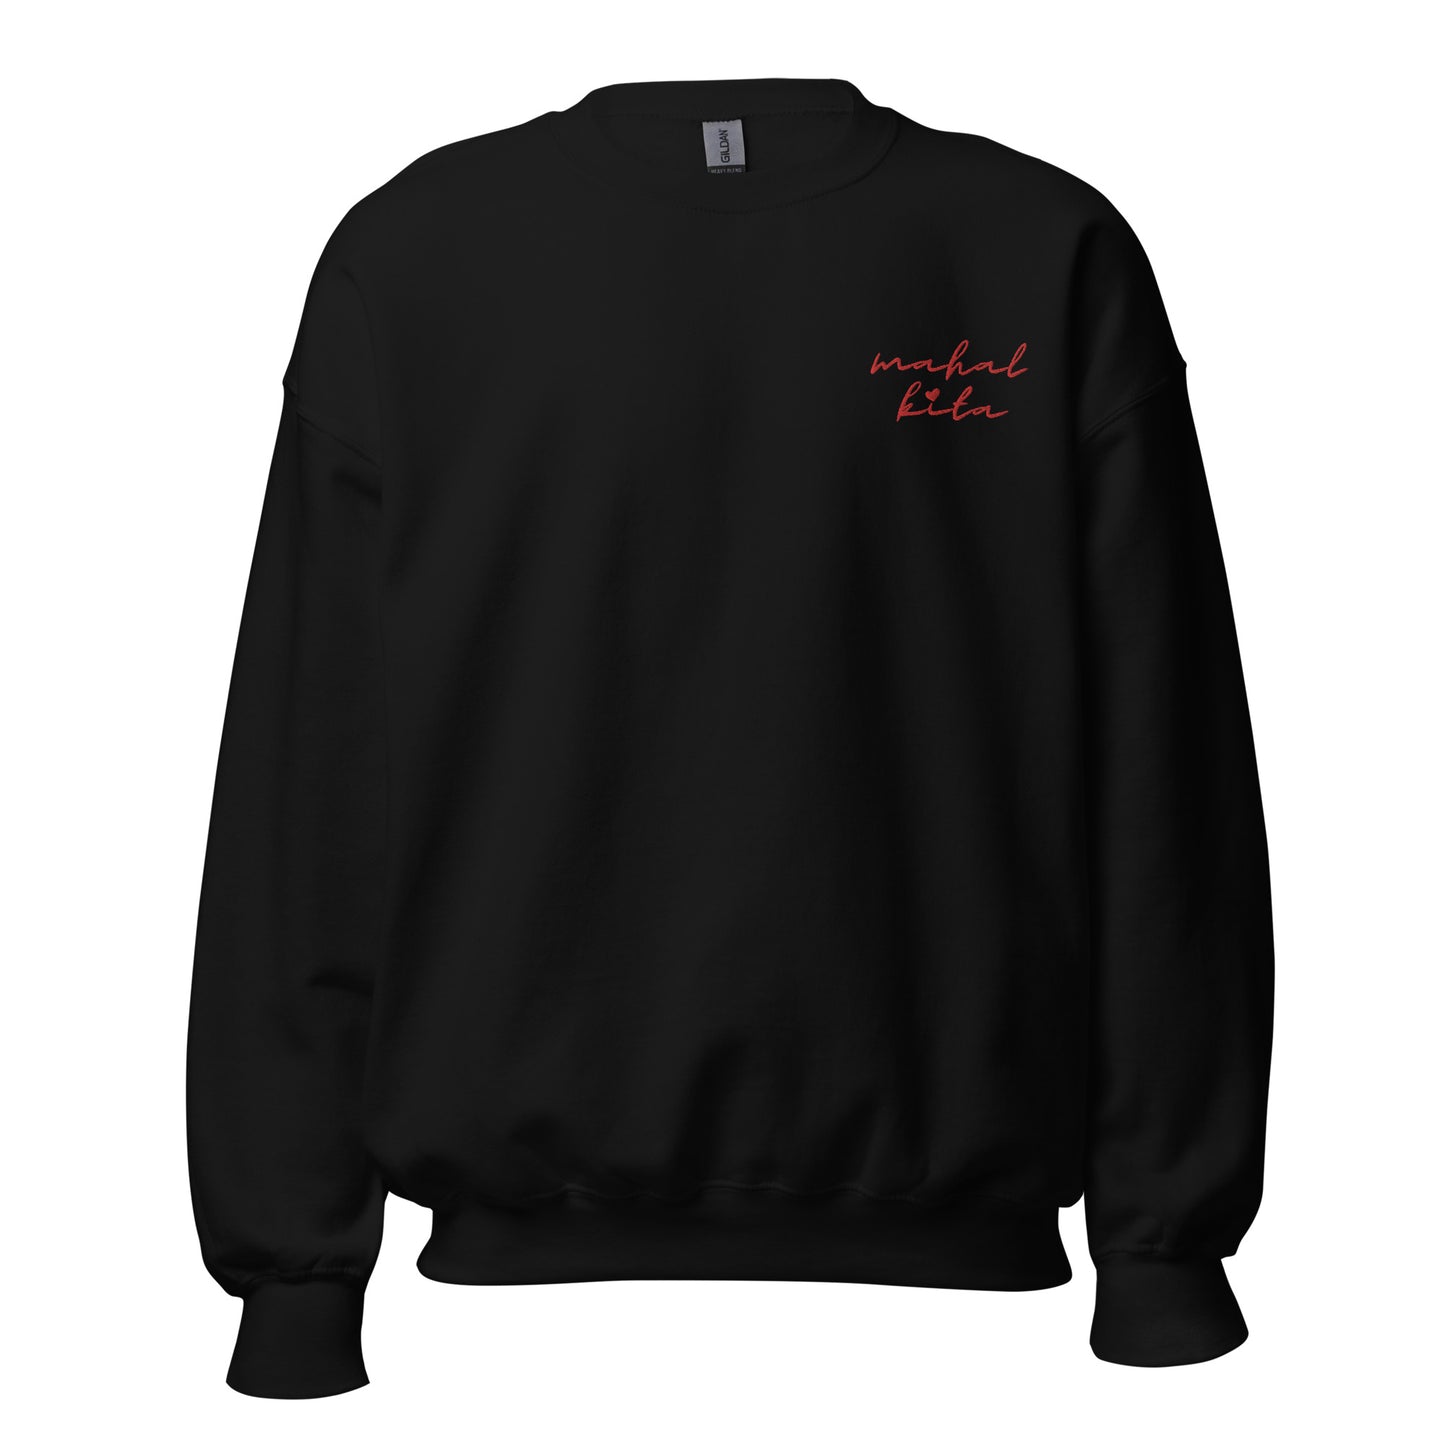 Filipino Sweatshirt Crew Neck Mahal Kita Love You Embroidered Valentine's Day Merch in color variant Black